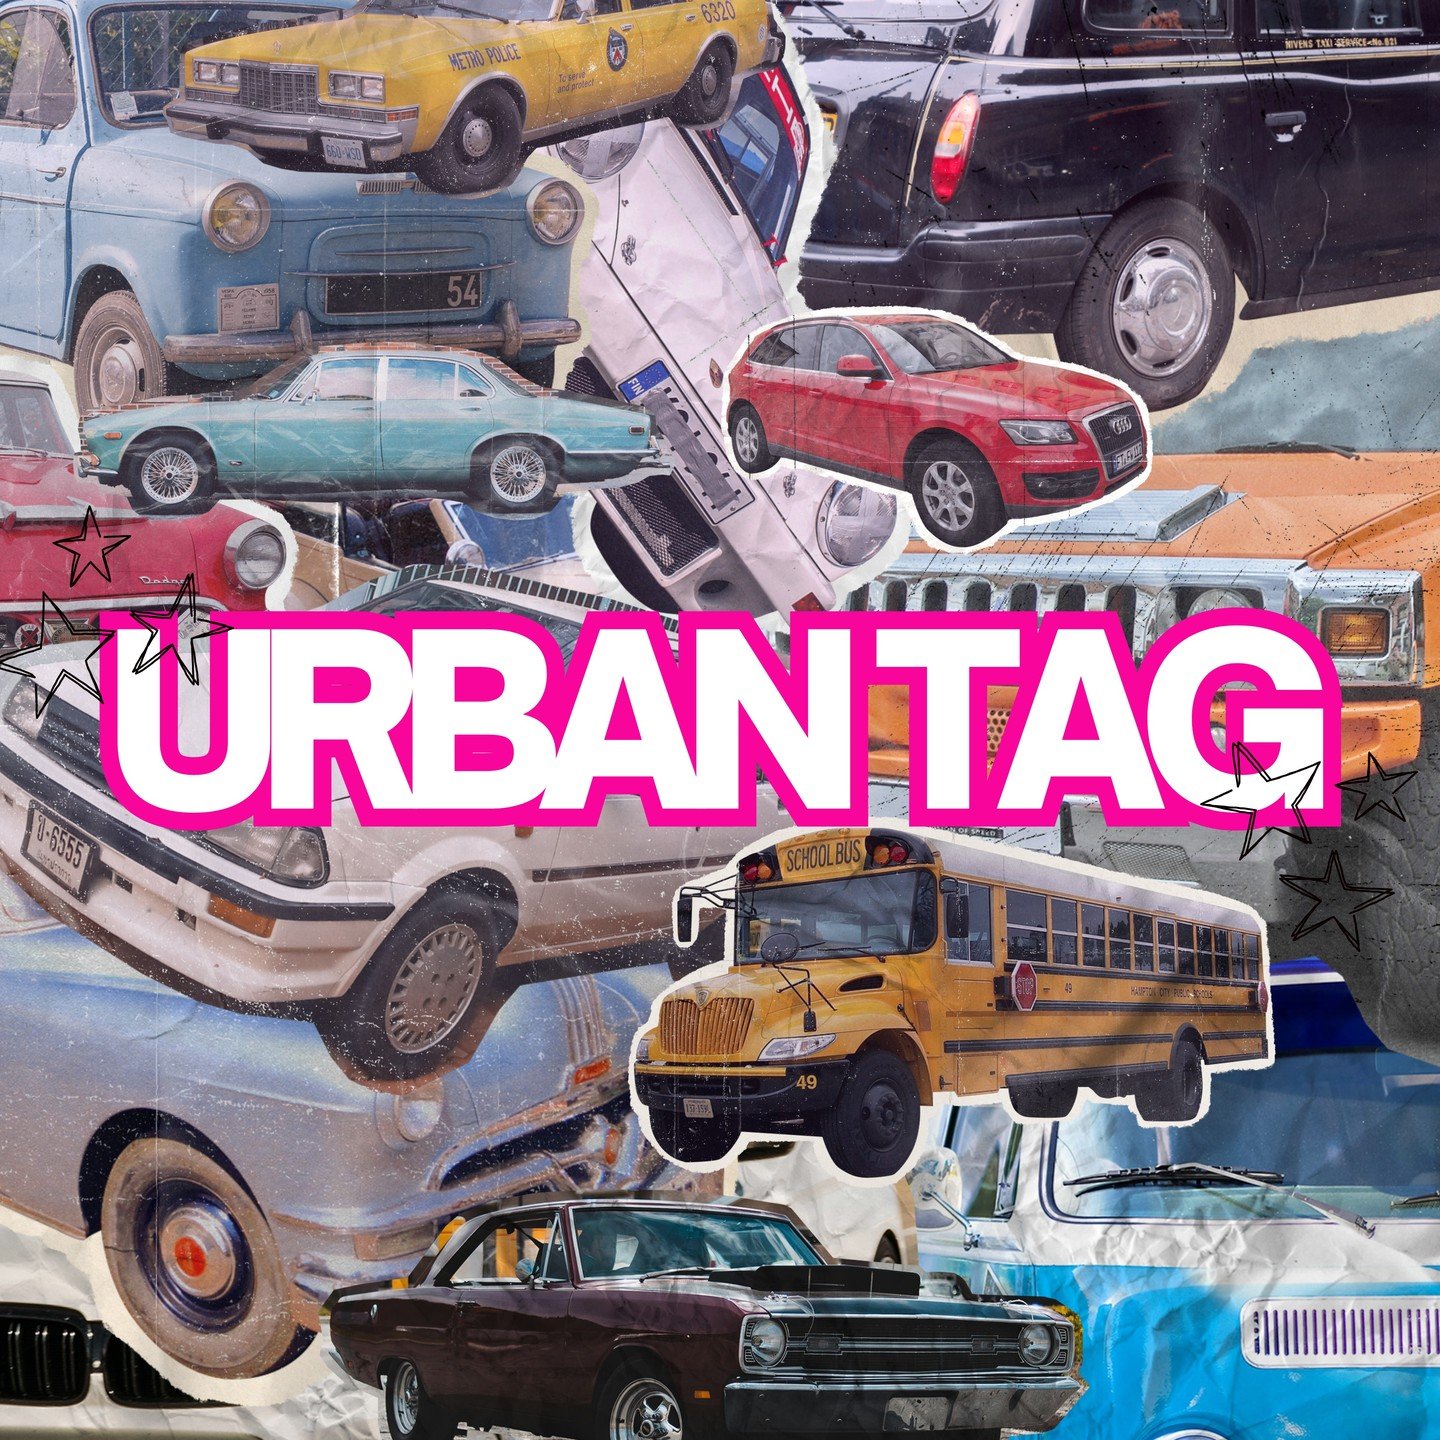 We'll see you this Sunday at 7pm for a friendly game of urban tag!! 🚗